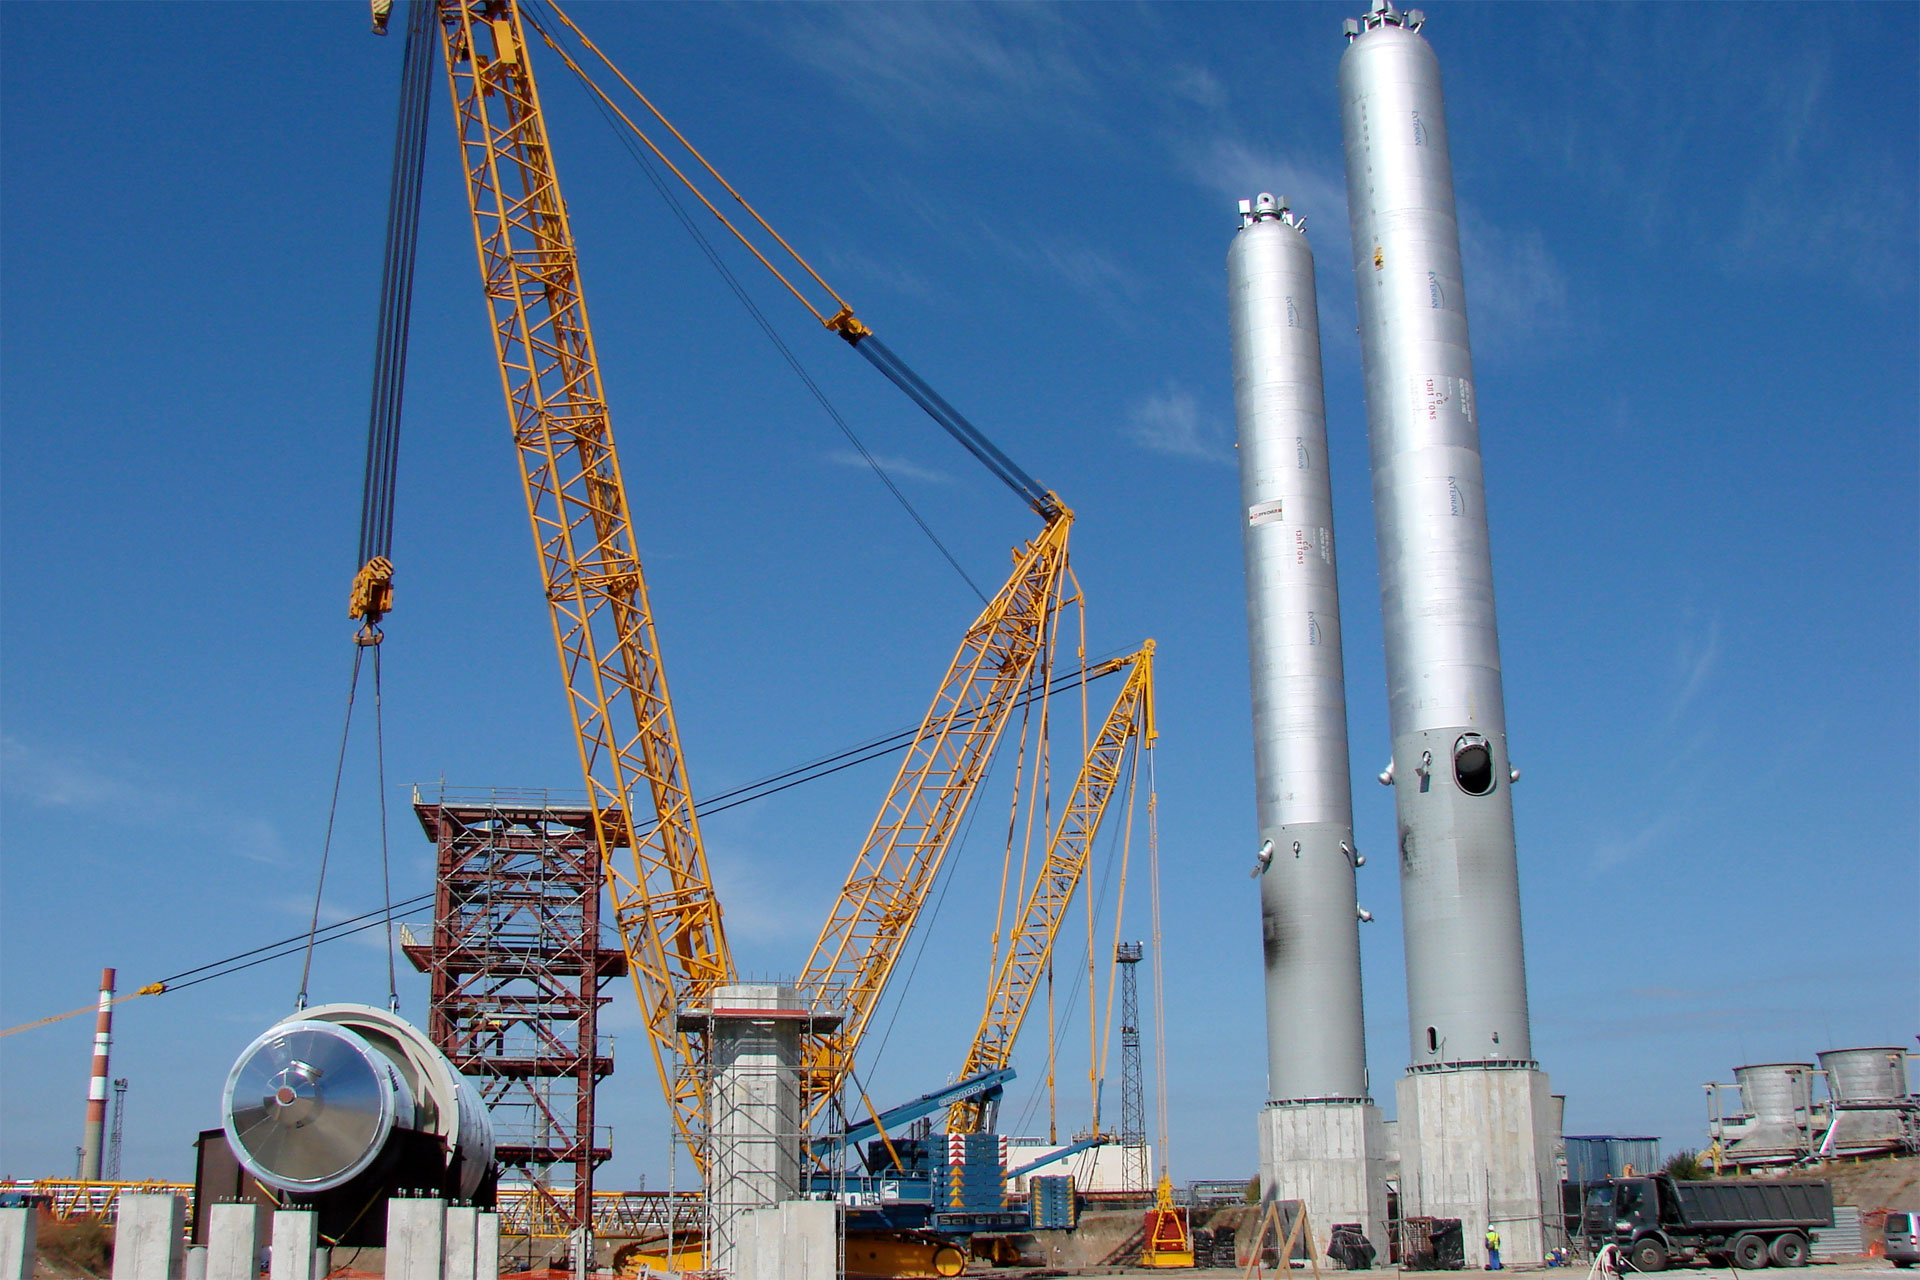 Large cranes lifting heavy cylindrical structures under a clear blue sky